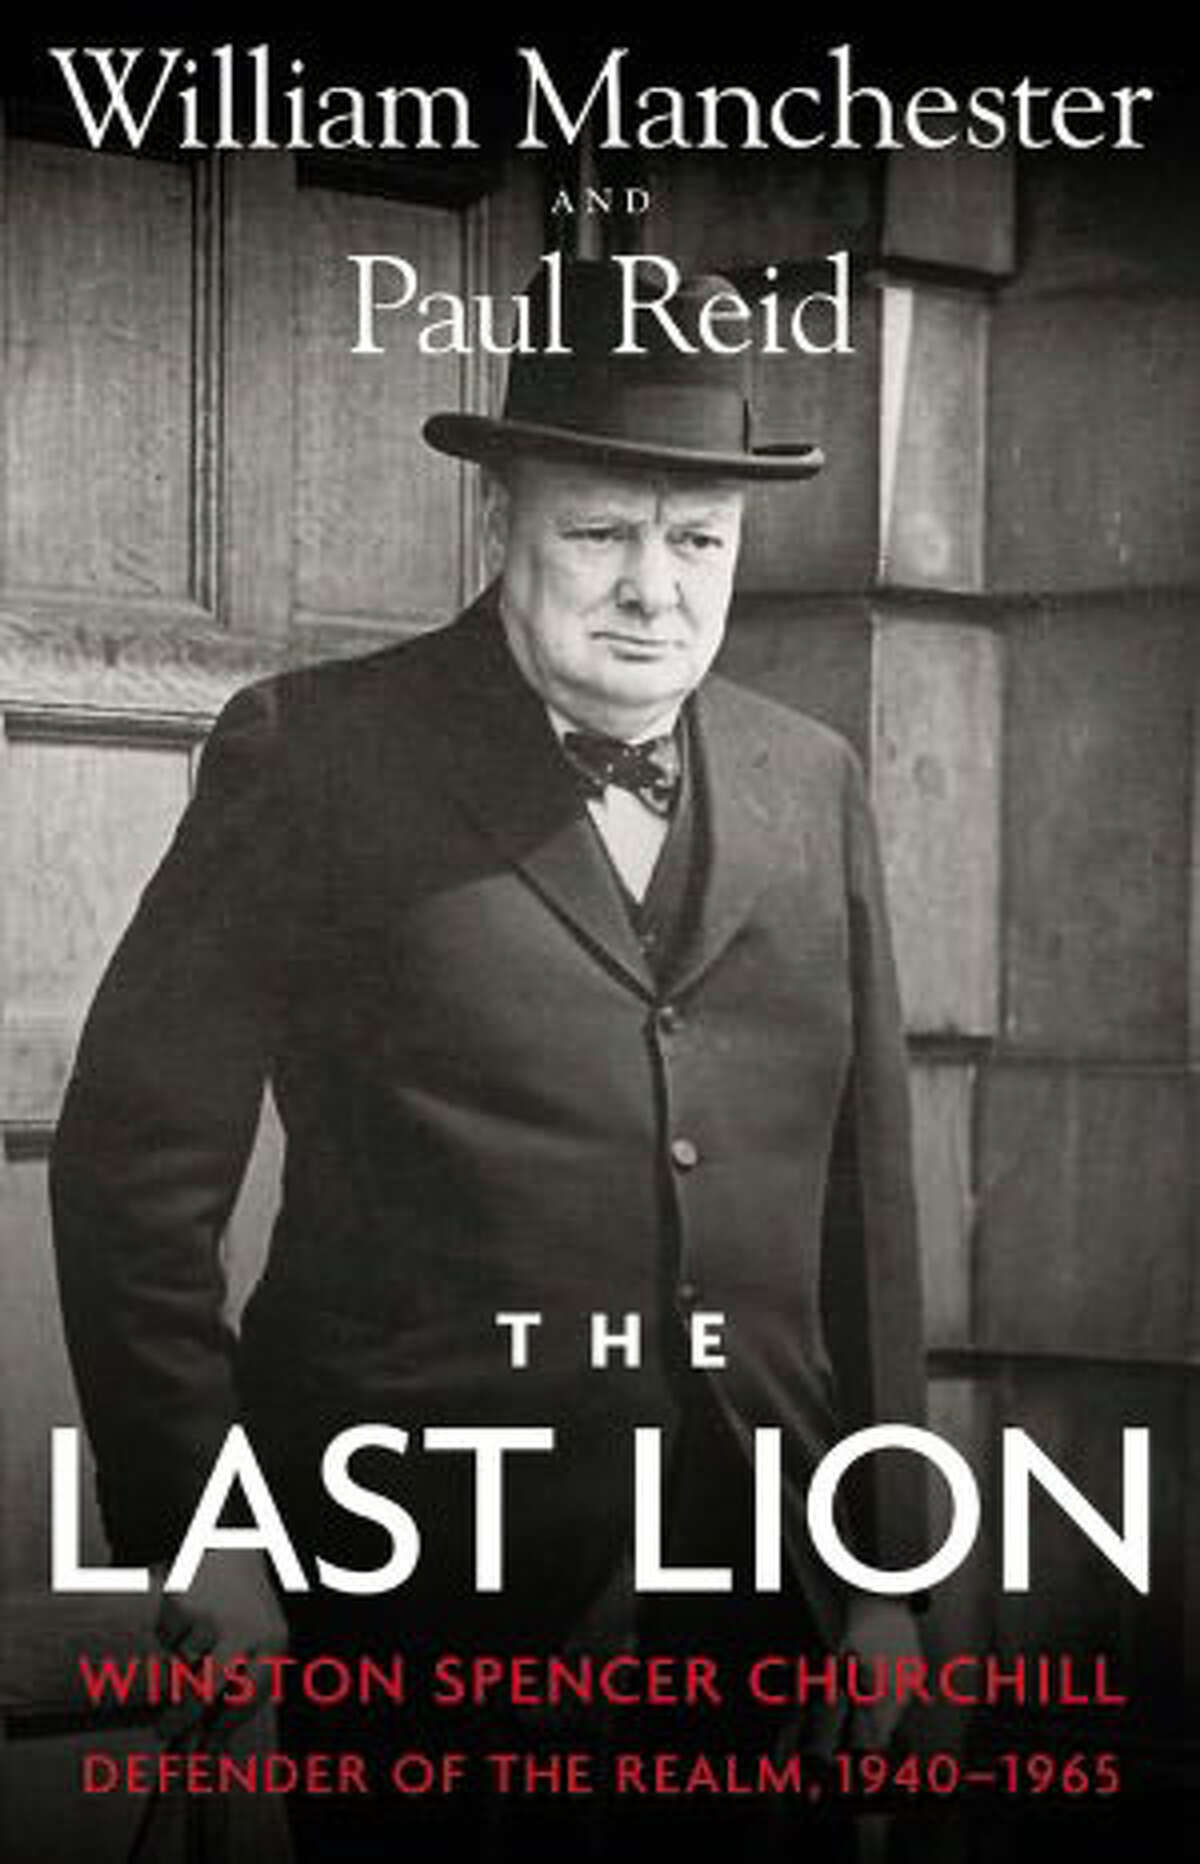 "The Last Lion: Winston Spencer Churchill, Defender of the Realm, 1940-1965" by William Manchester and Paul Reid